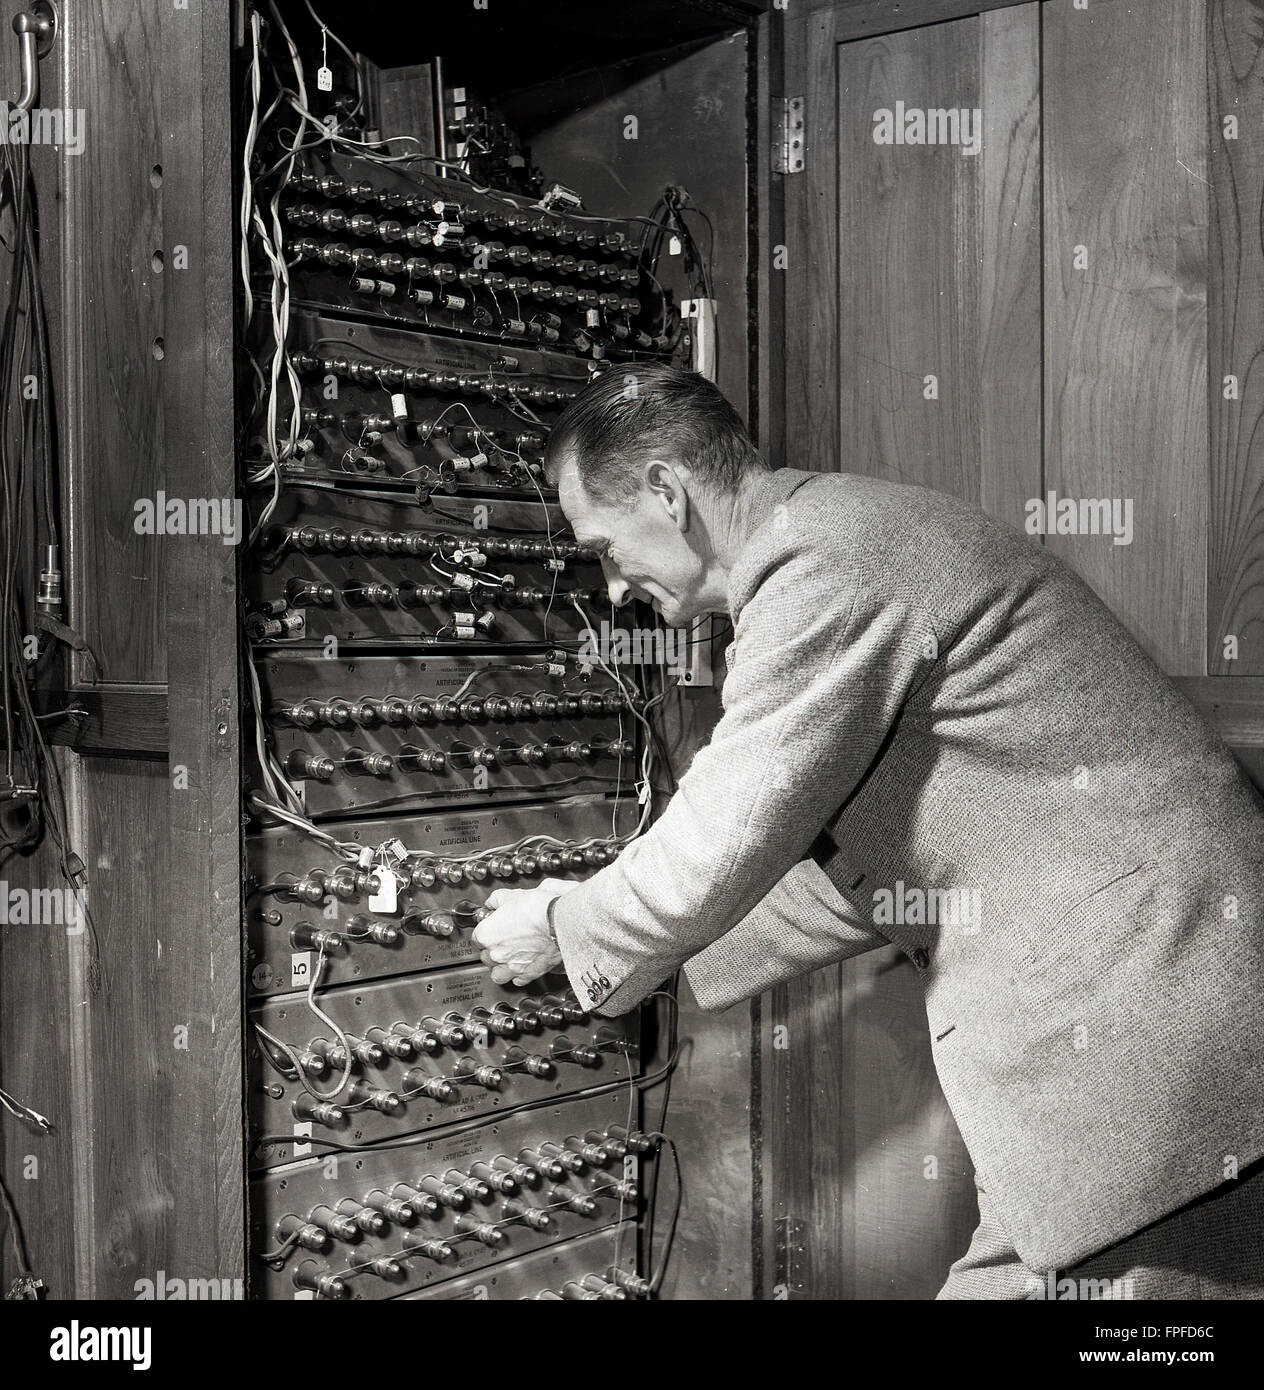 1950s historical, a man moving dials on a control panel or circuit board at the transatlantic cable station in Waterville, Co. Kerry, Ireland. once home to the one of the largest cable stations in the world. The first successful transatlantic telegraph message was transmitted through there in 1884, after the Commerical Cable Co had laid two cables across the Atlantic ocean connecting Canada, Britain and France, via Waterville, a total of 2,399 miles of cable. Stock Photo